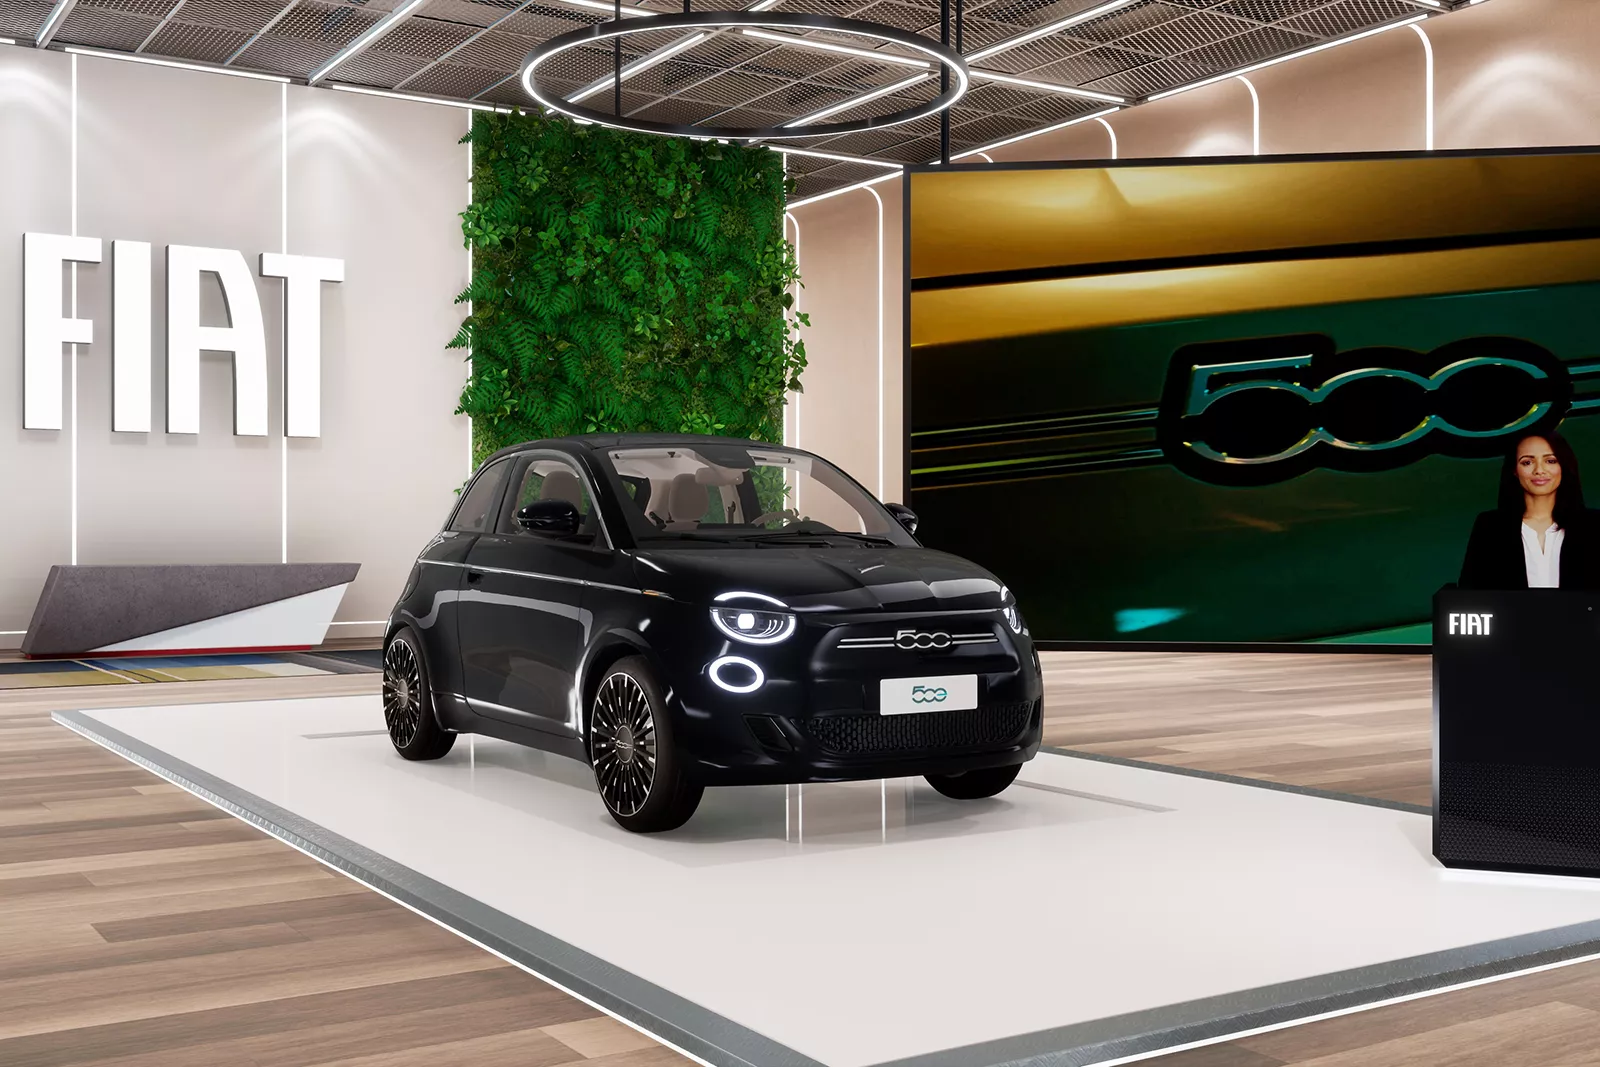 Talloos Schadelijk Groot universum Fiat Will Use the Metaverse To Sell Its Cars in America